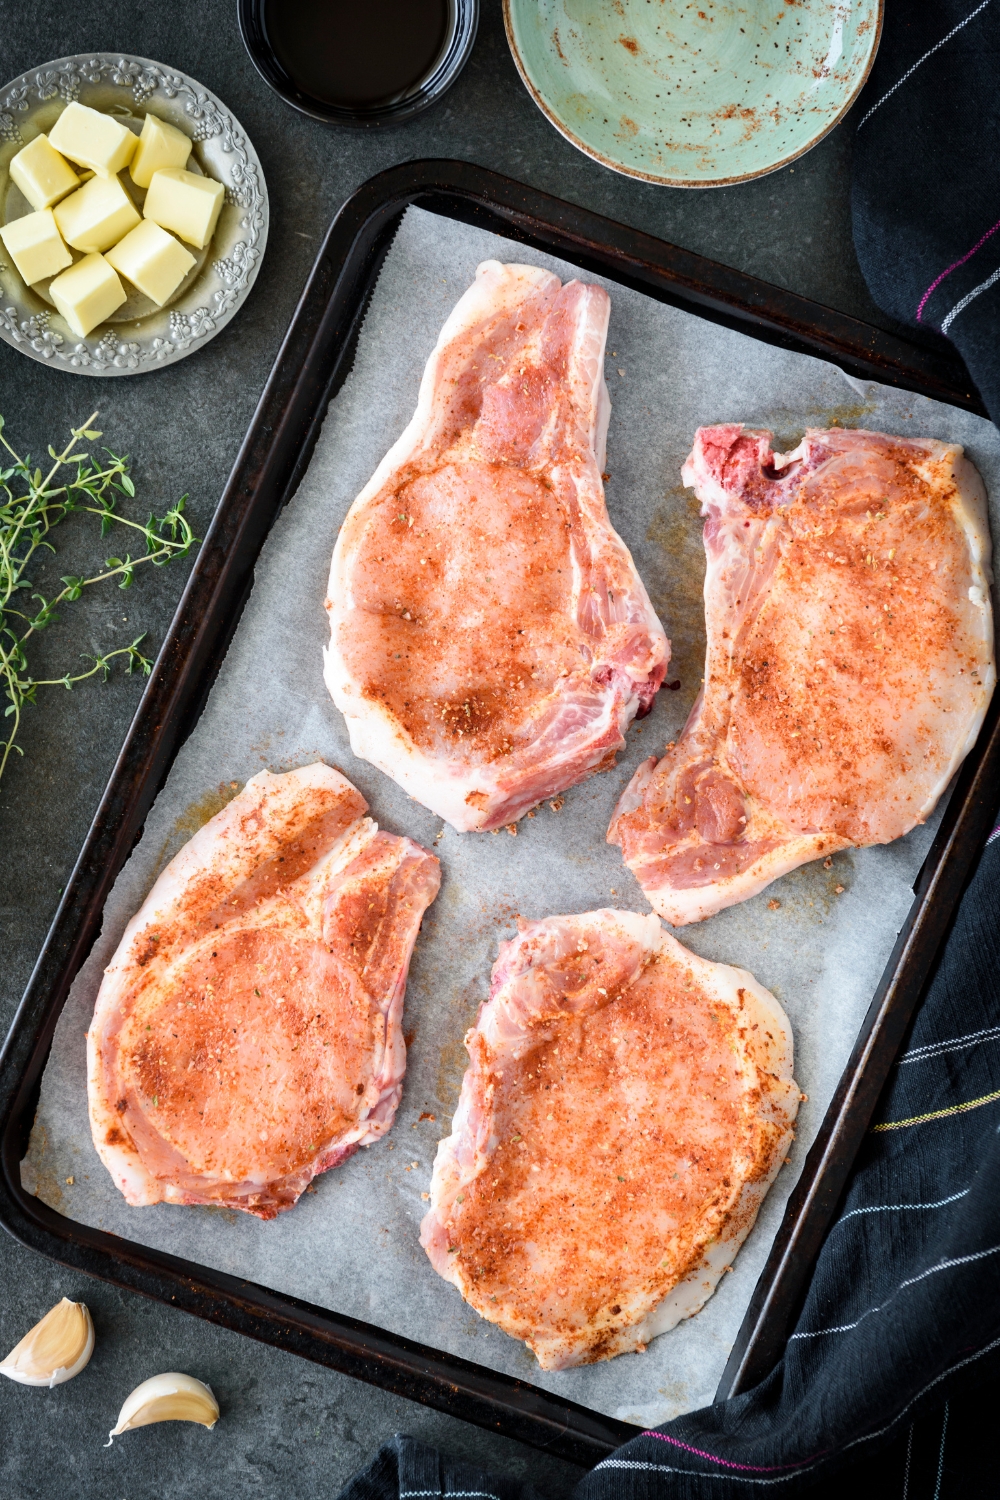 Four raw pork chops seasoned and placed on a baking sheet lined with parchment paper.